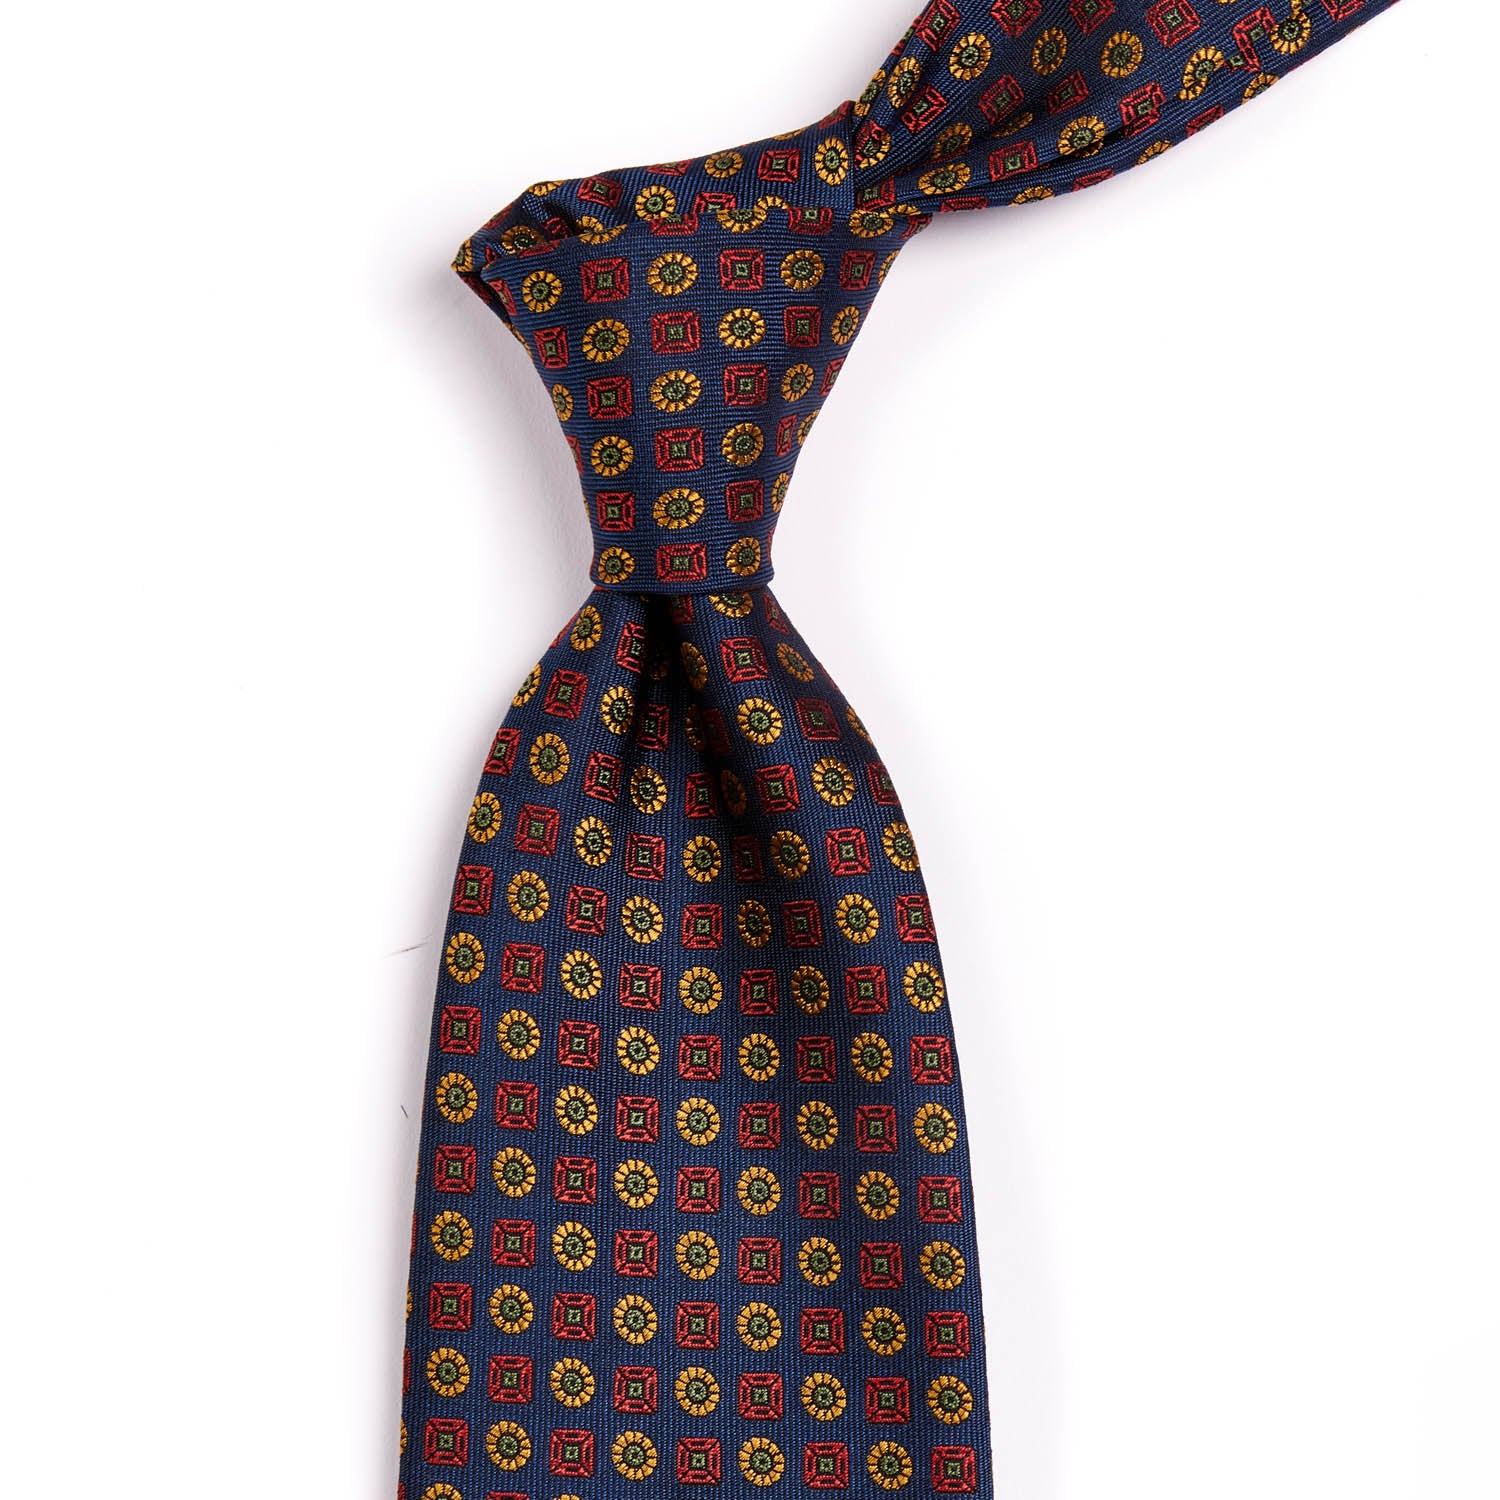 A Sovereign Grade Navy Floral Jacquard Tie, 150 cm designed by KirbyAllison.com in the United Kingdom.